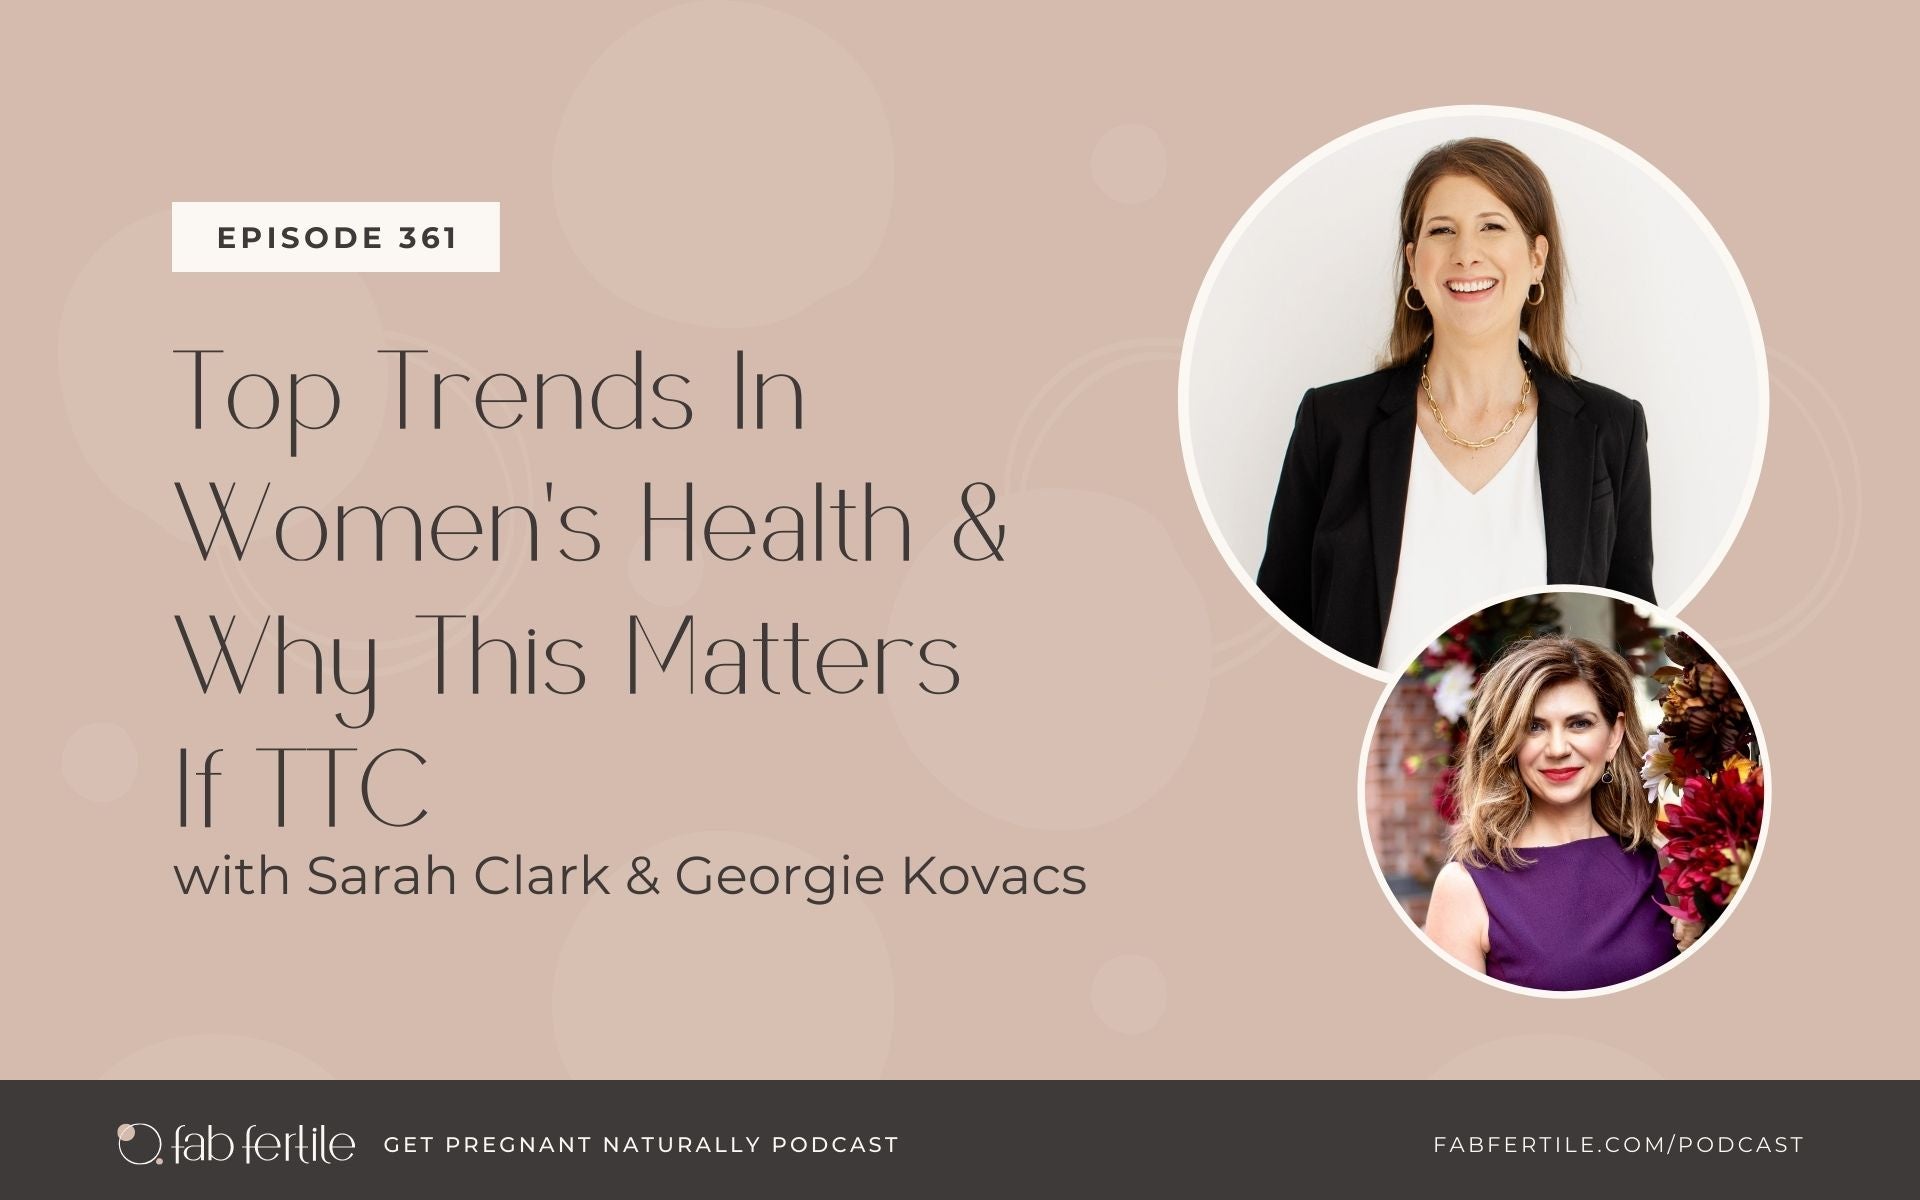 Top Trends In Women's Health and Why This Matters If TTC